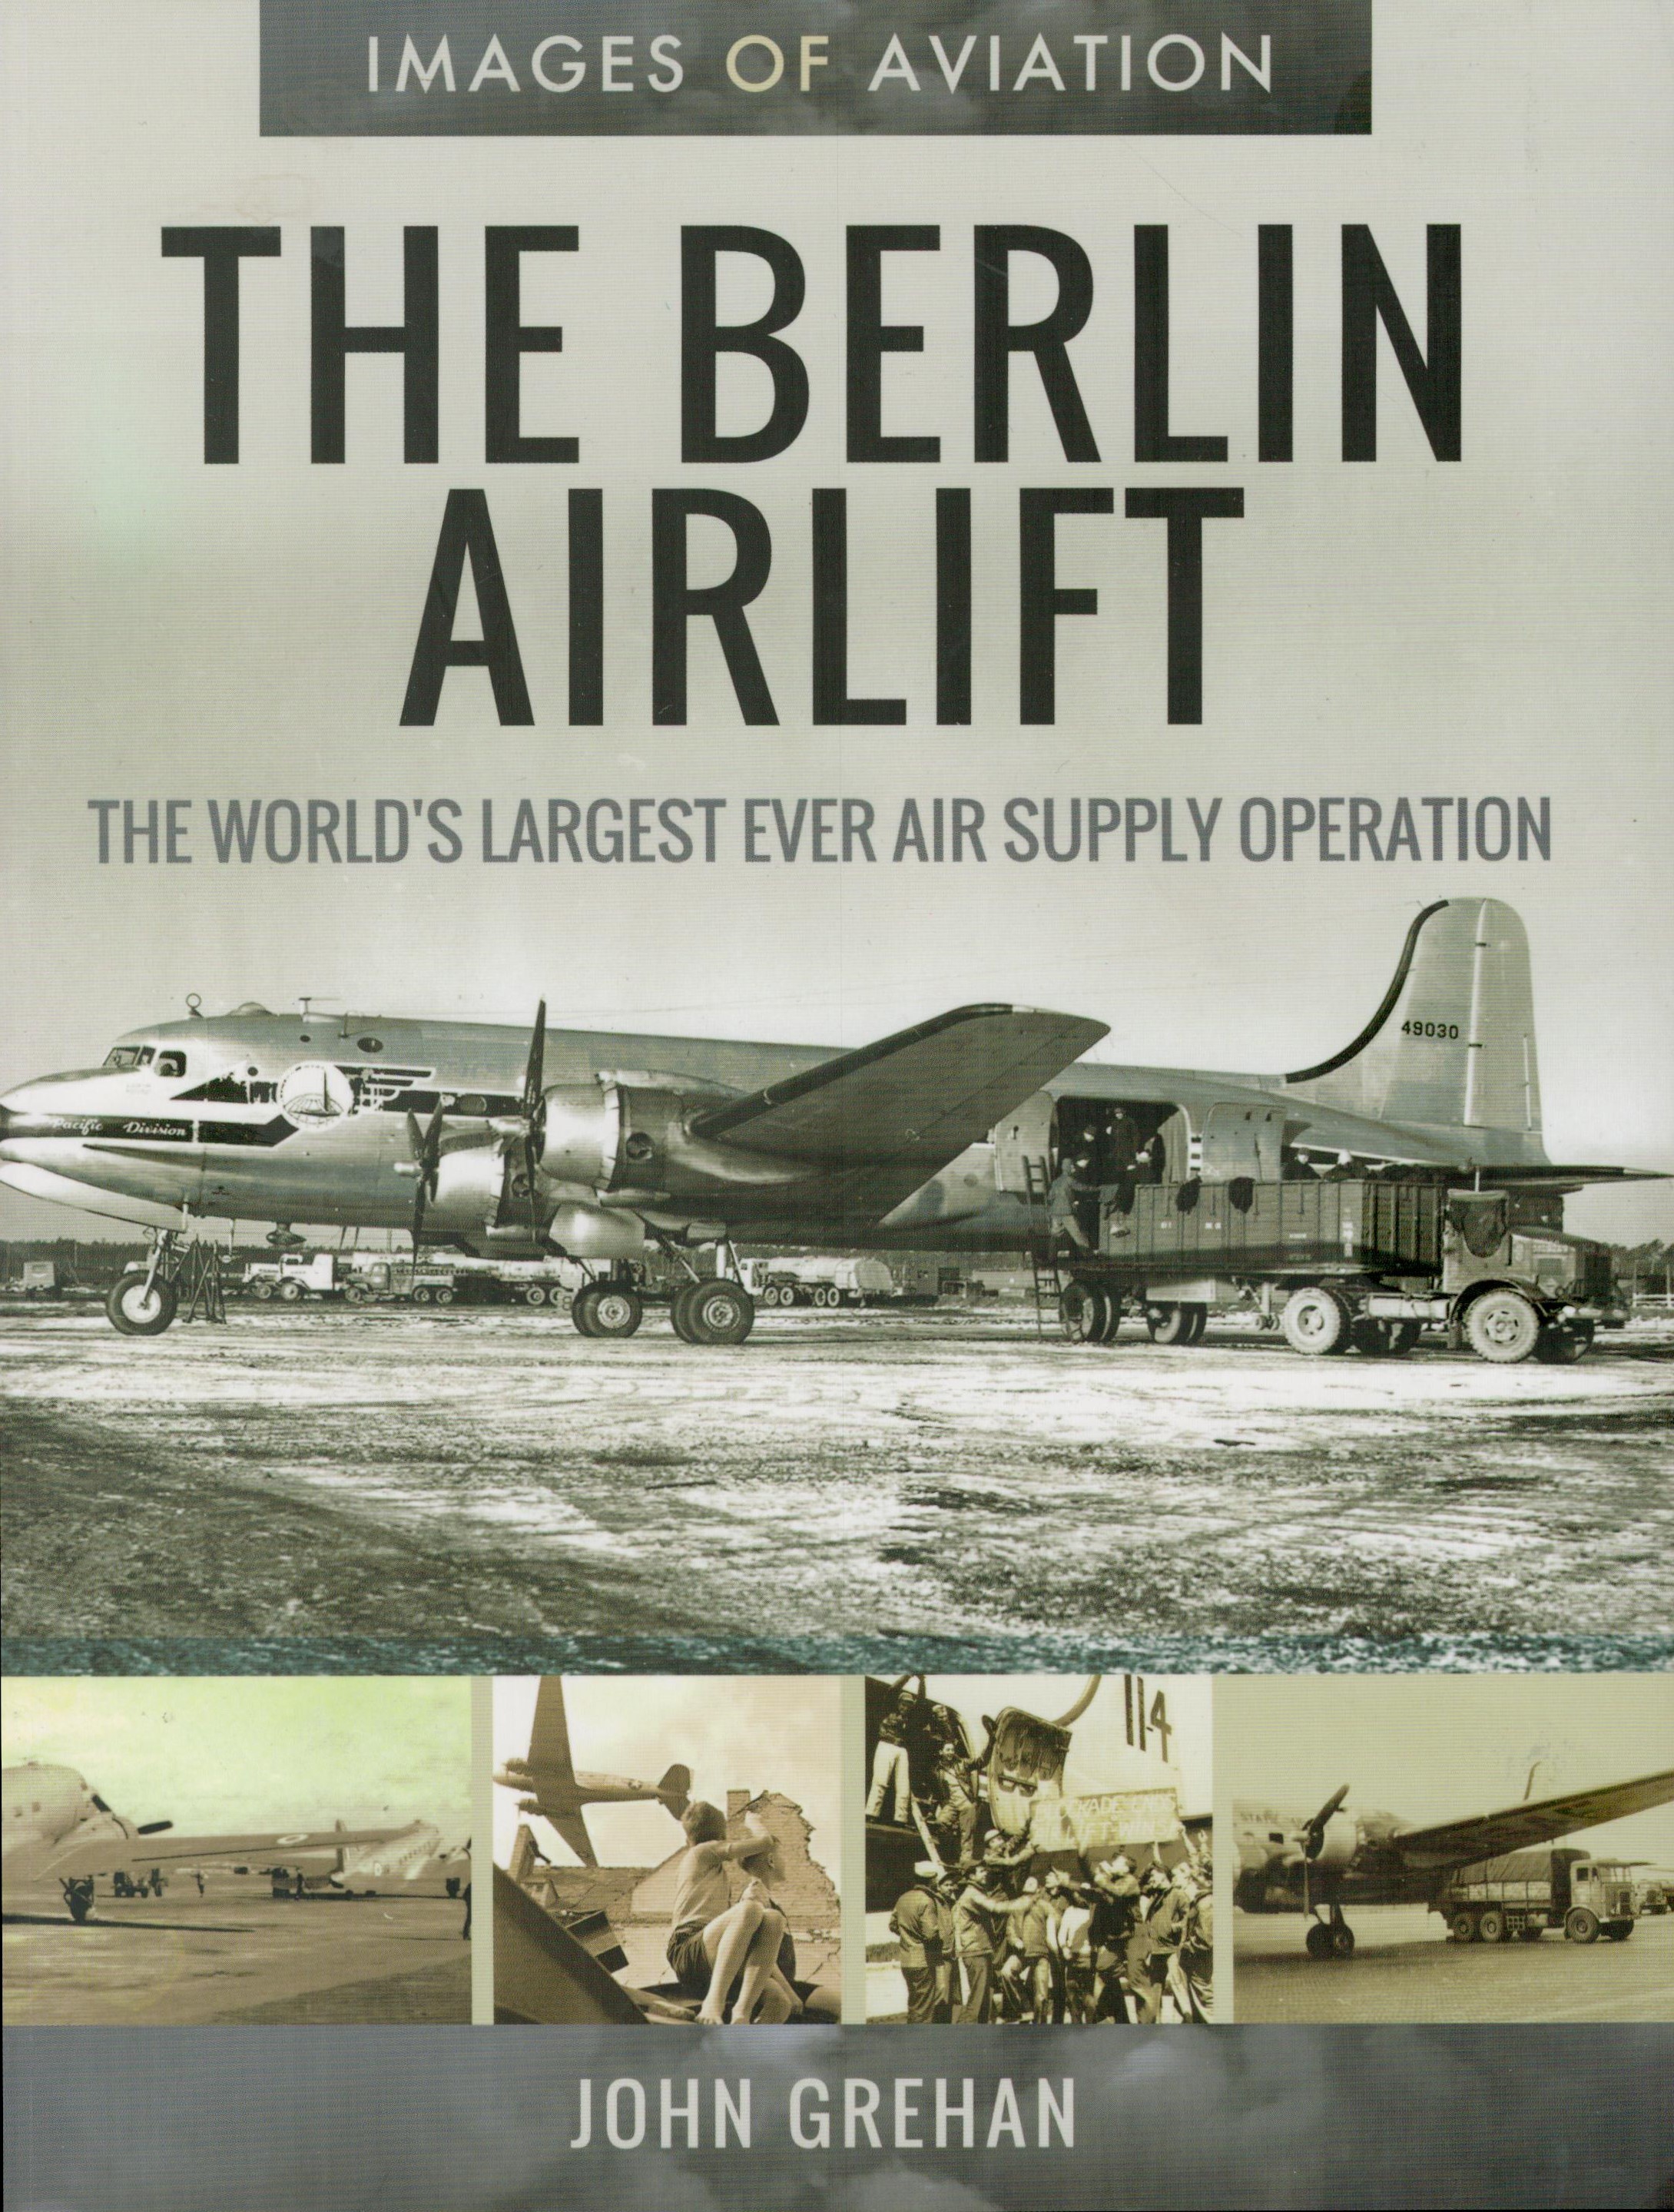 The Berlin Airlift Paperback Book By John Grehan. Published in 2019. Good Condition Overall. All